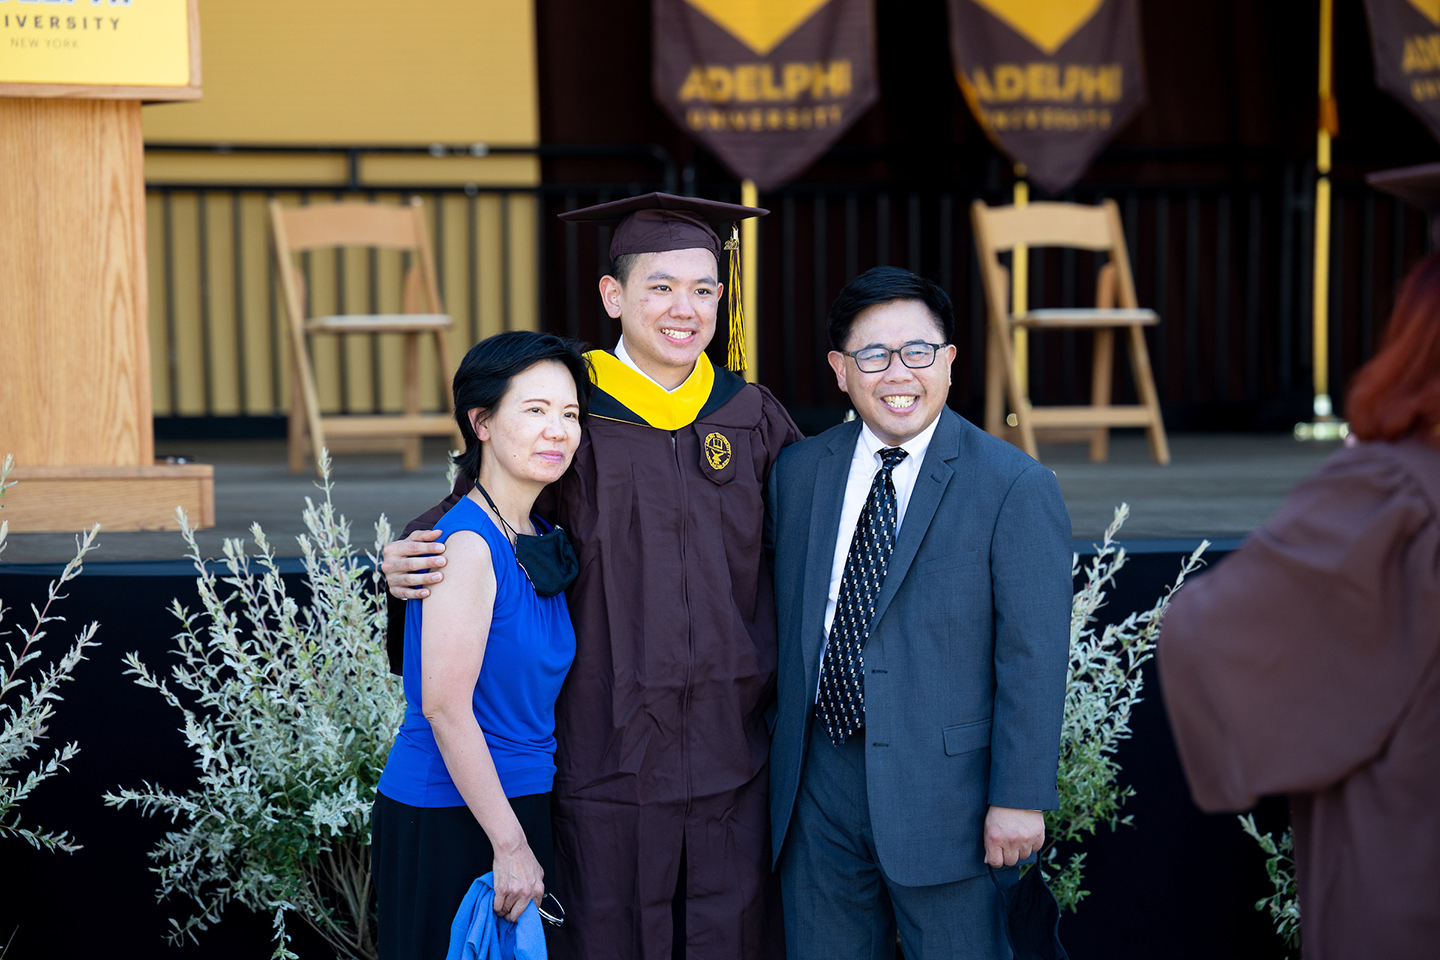 Graduating student poses with parents in front of commencement stage.